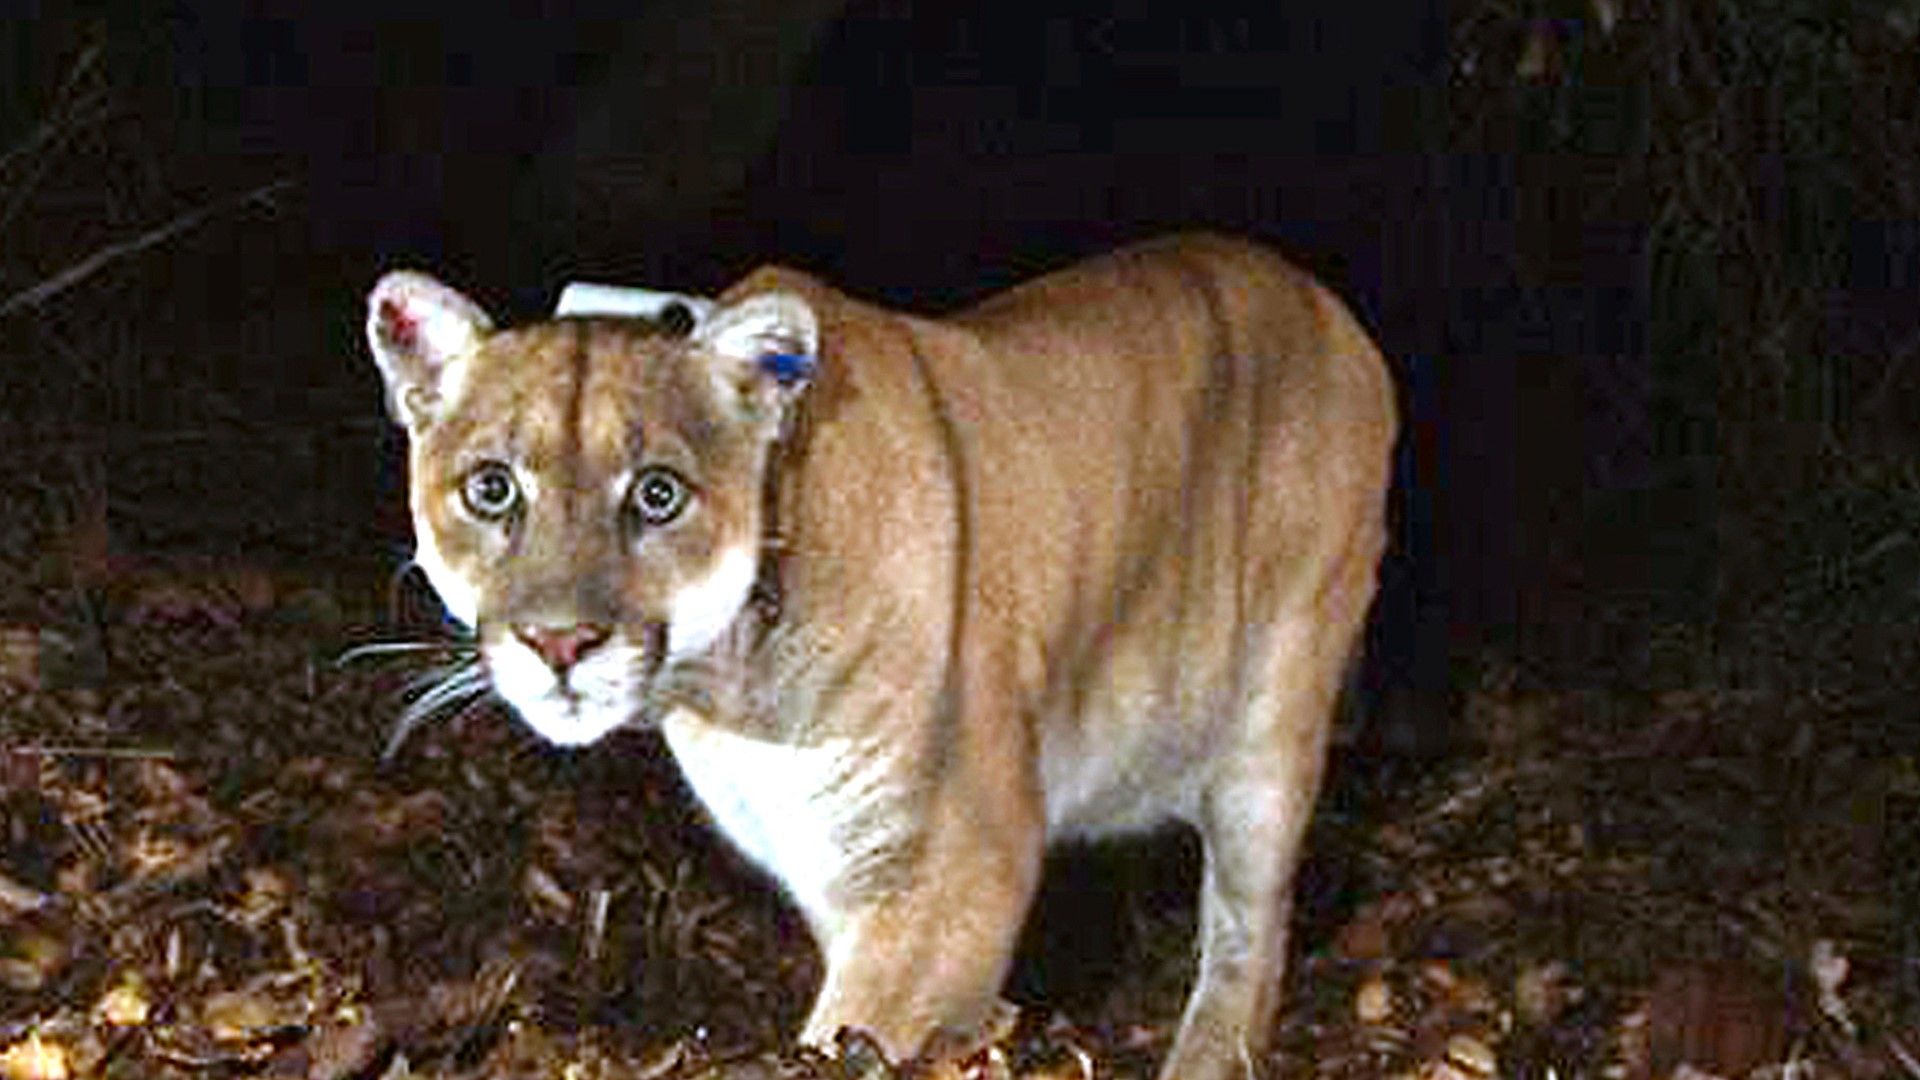 A famed Hollywood mountain lion, P-22, was euthanized this weekend. And more in your Top 10 headlines.